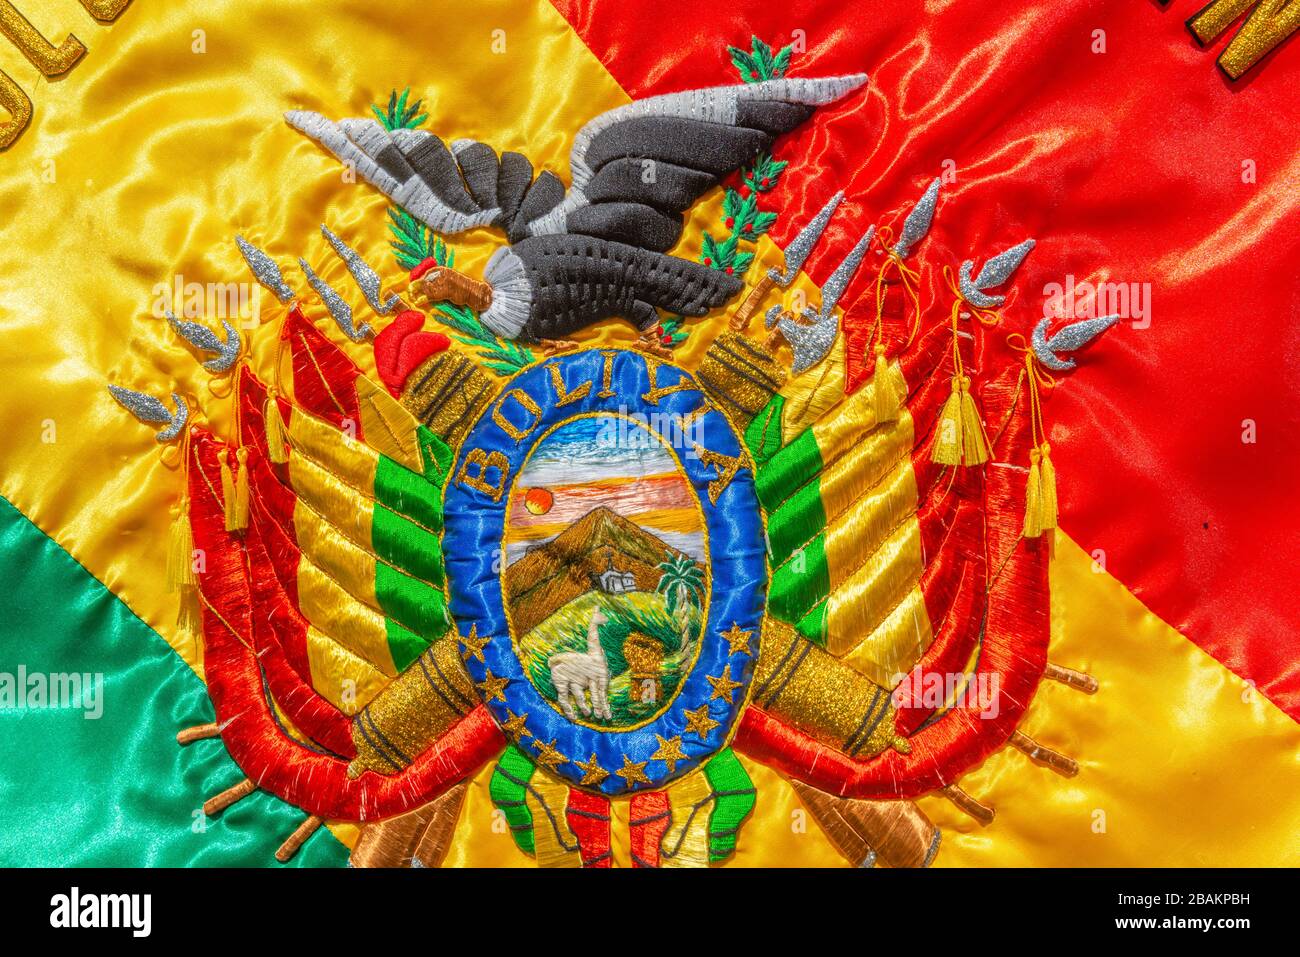 Bolivian flag and emblem at a  fiesta in Cochabamba, Department Cochabamba, Eastern Andes, Bolivia, Latin America Stock Photo